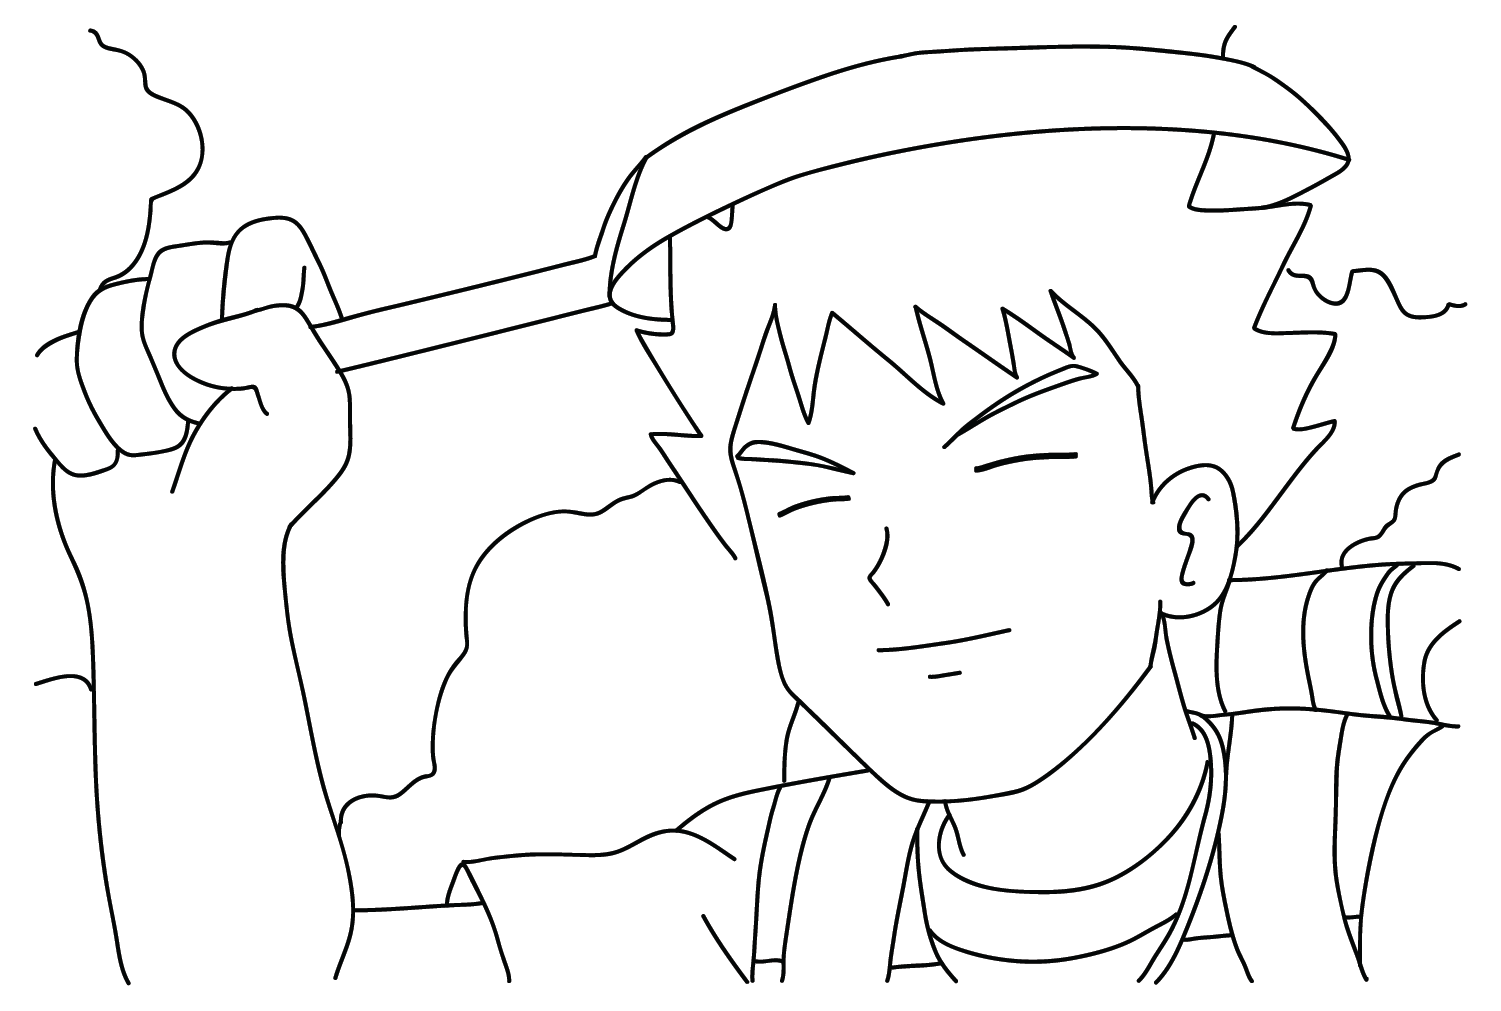 Brock Coloring Page PDF from Brock